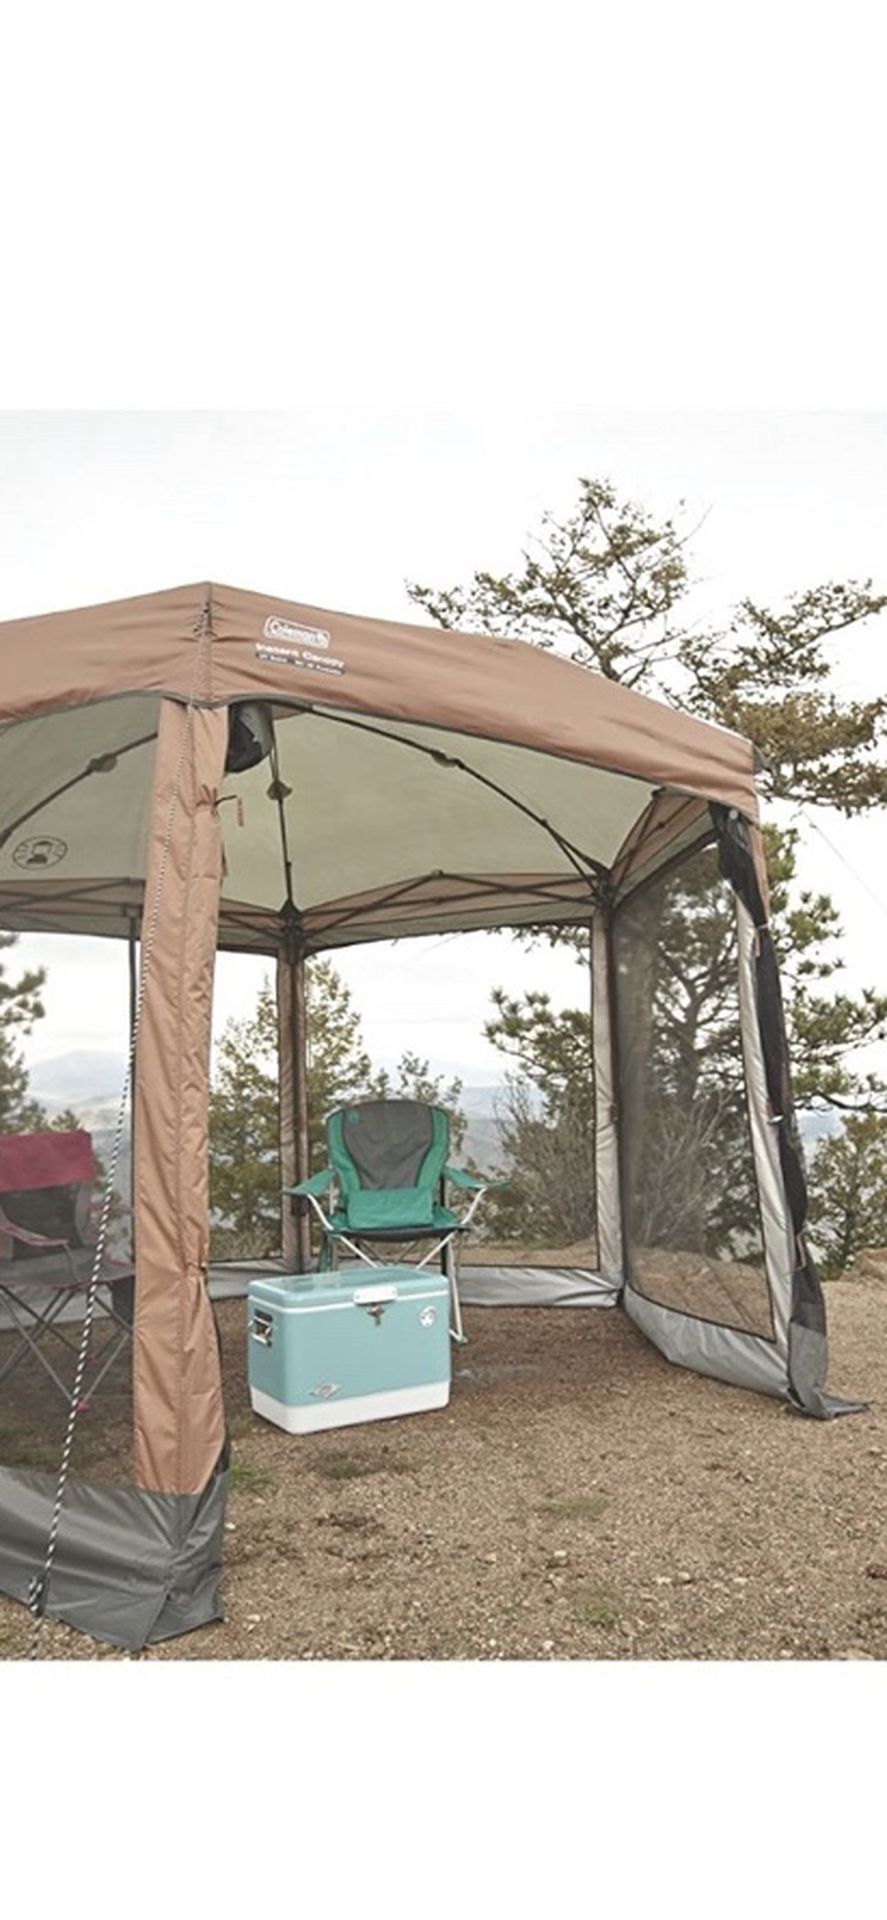 NEW - Coleman Screened Canopy 12x10